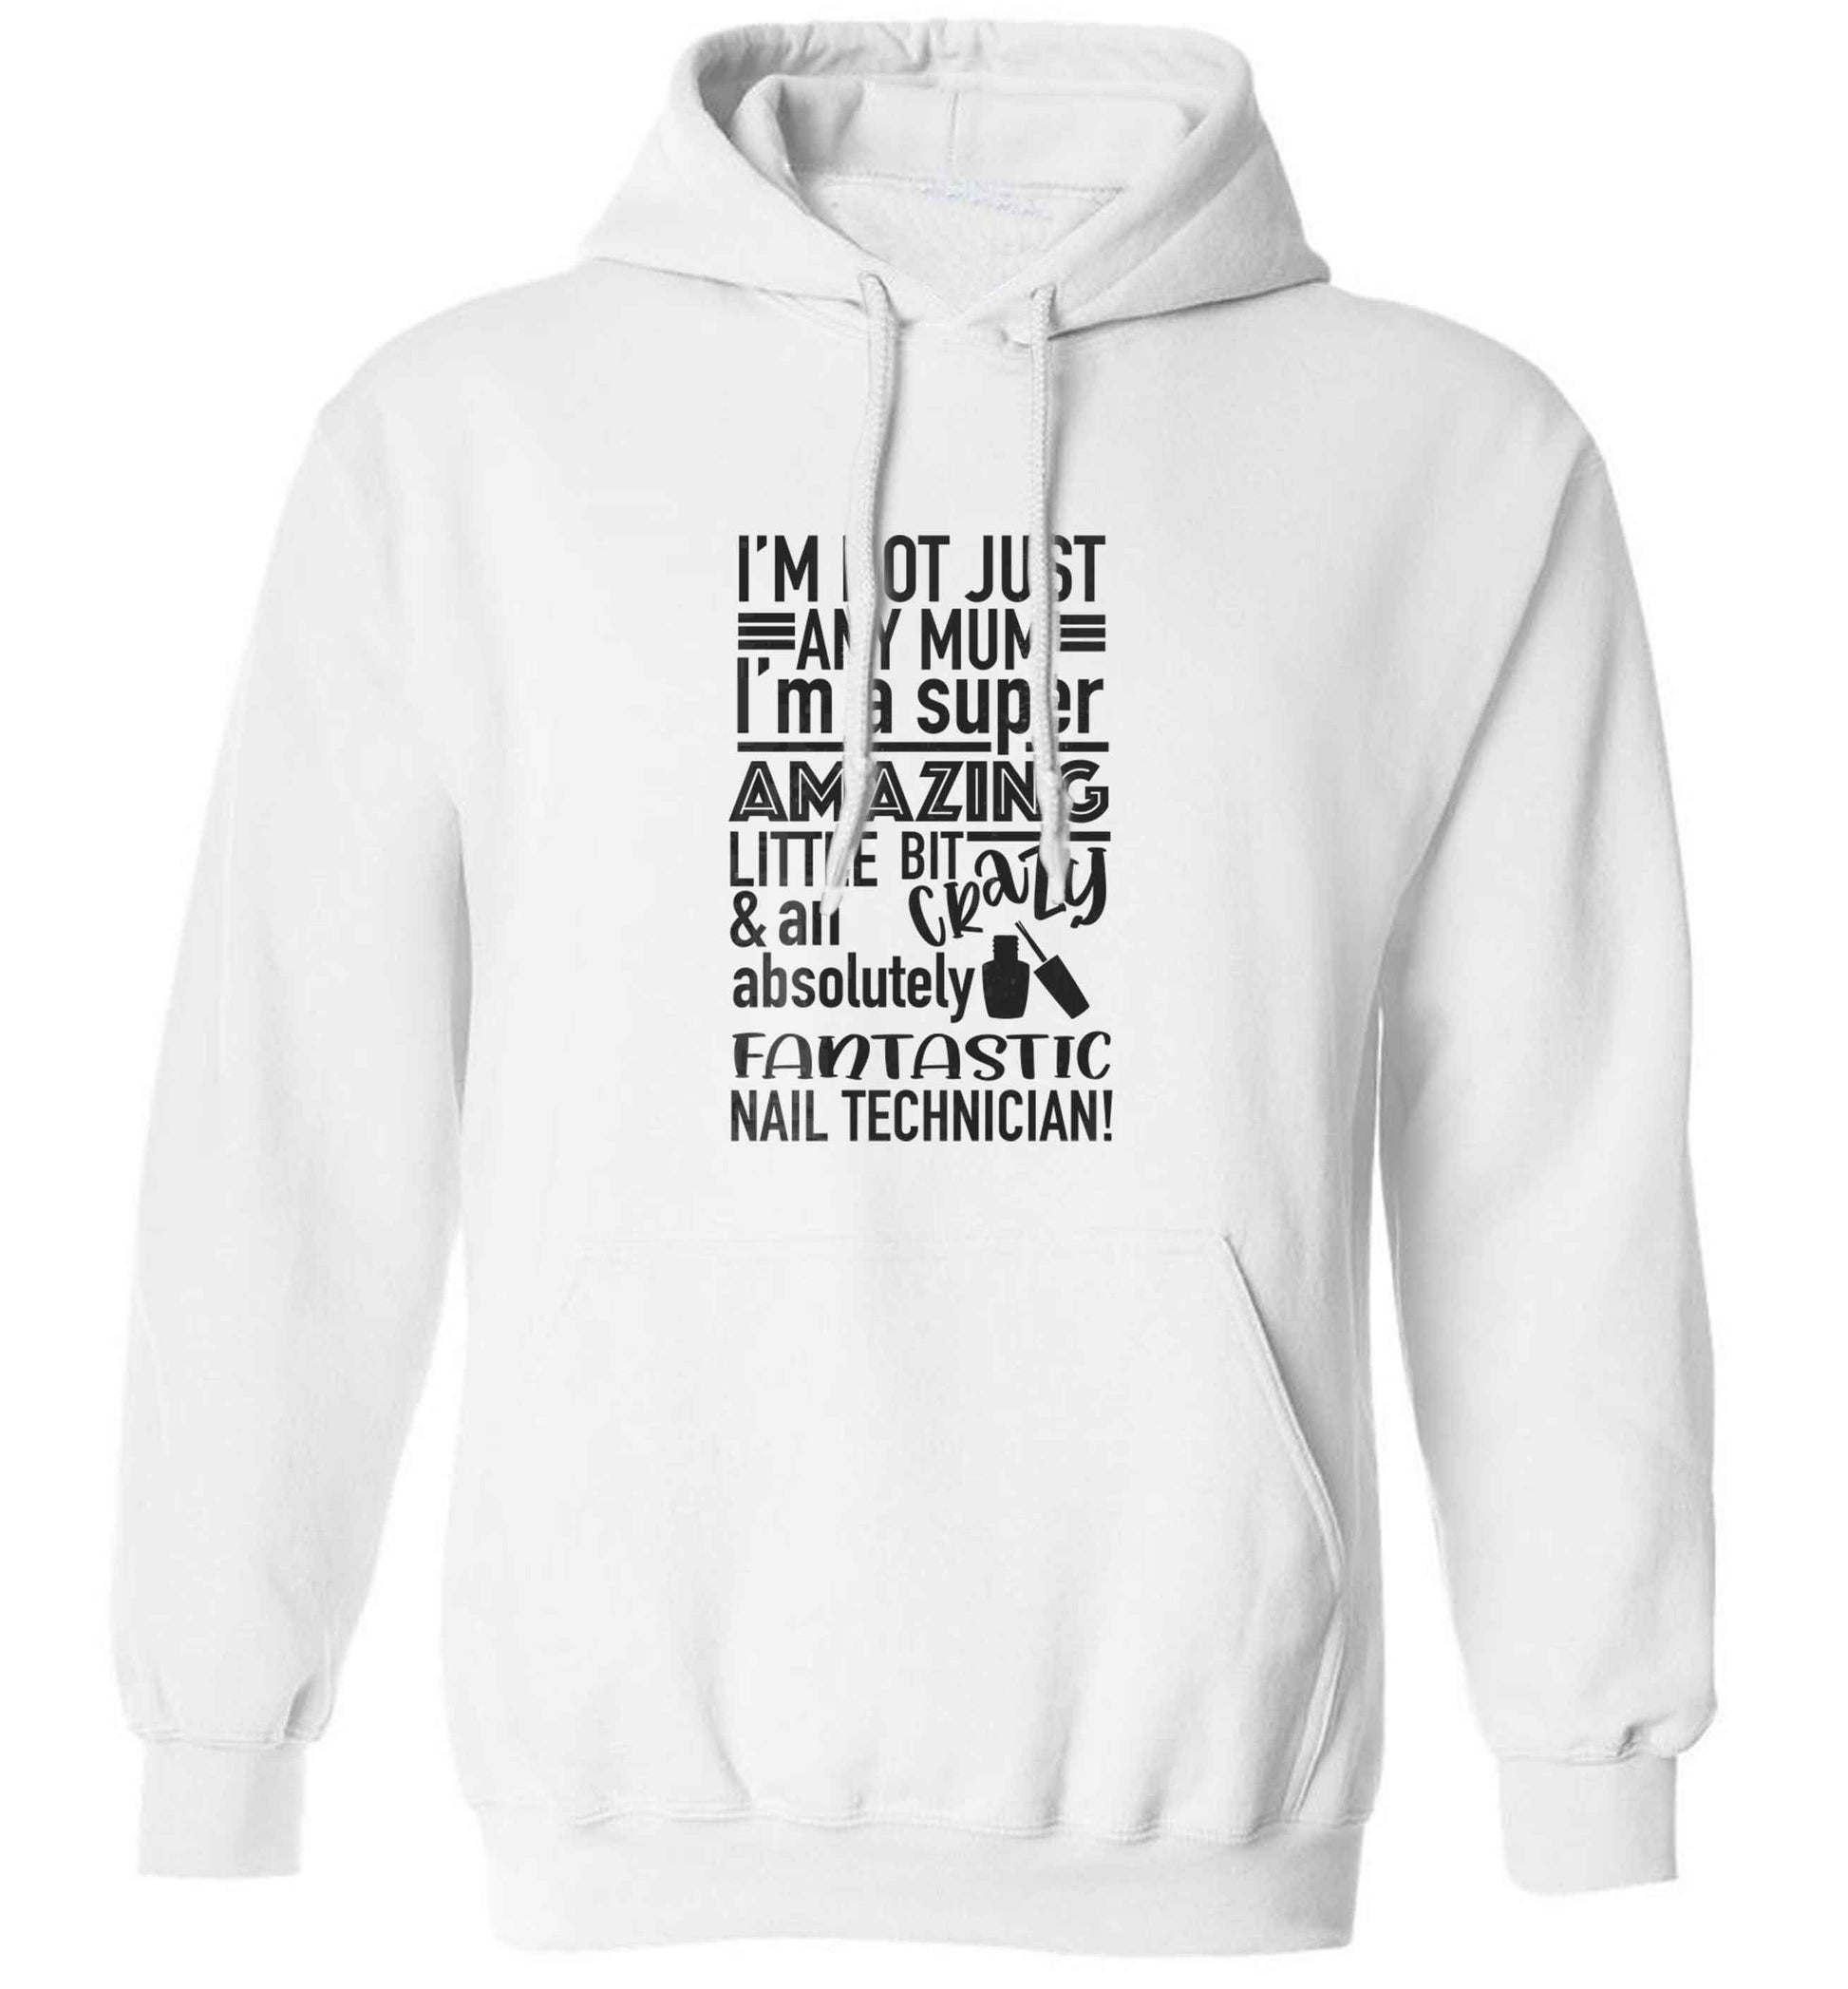 I'm not just any mum I'm a super amazing little bit crazy and an absolutely fantastic nail technician! adults unisex white hoodie 2XL